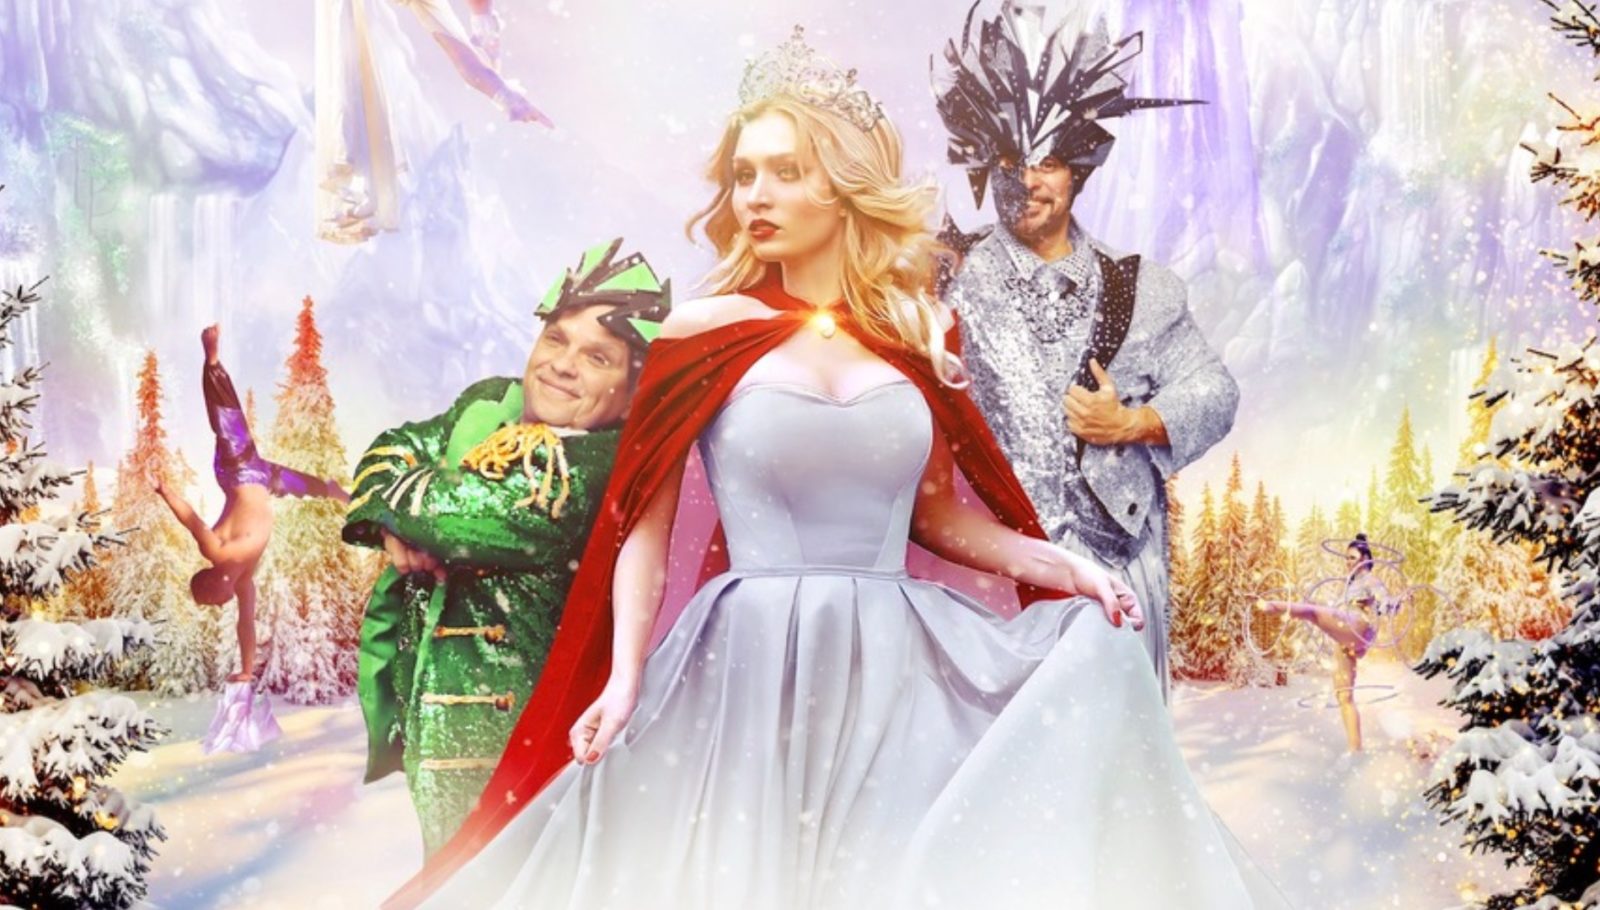 In Cirque Musica's 2022 holiday show, a female circus performer in a white gown and red cloak stands between a child performer in a Christmas tree costume and a man in a silver and brown costume with an antlered mask